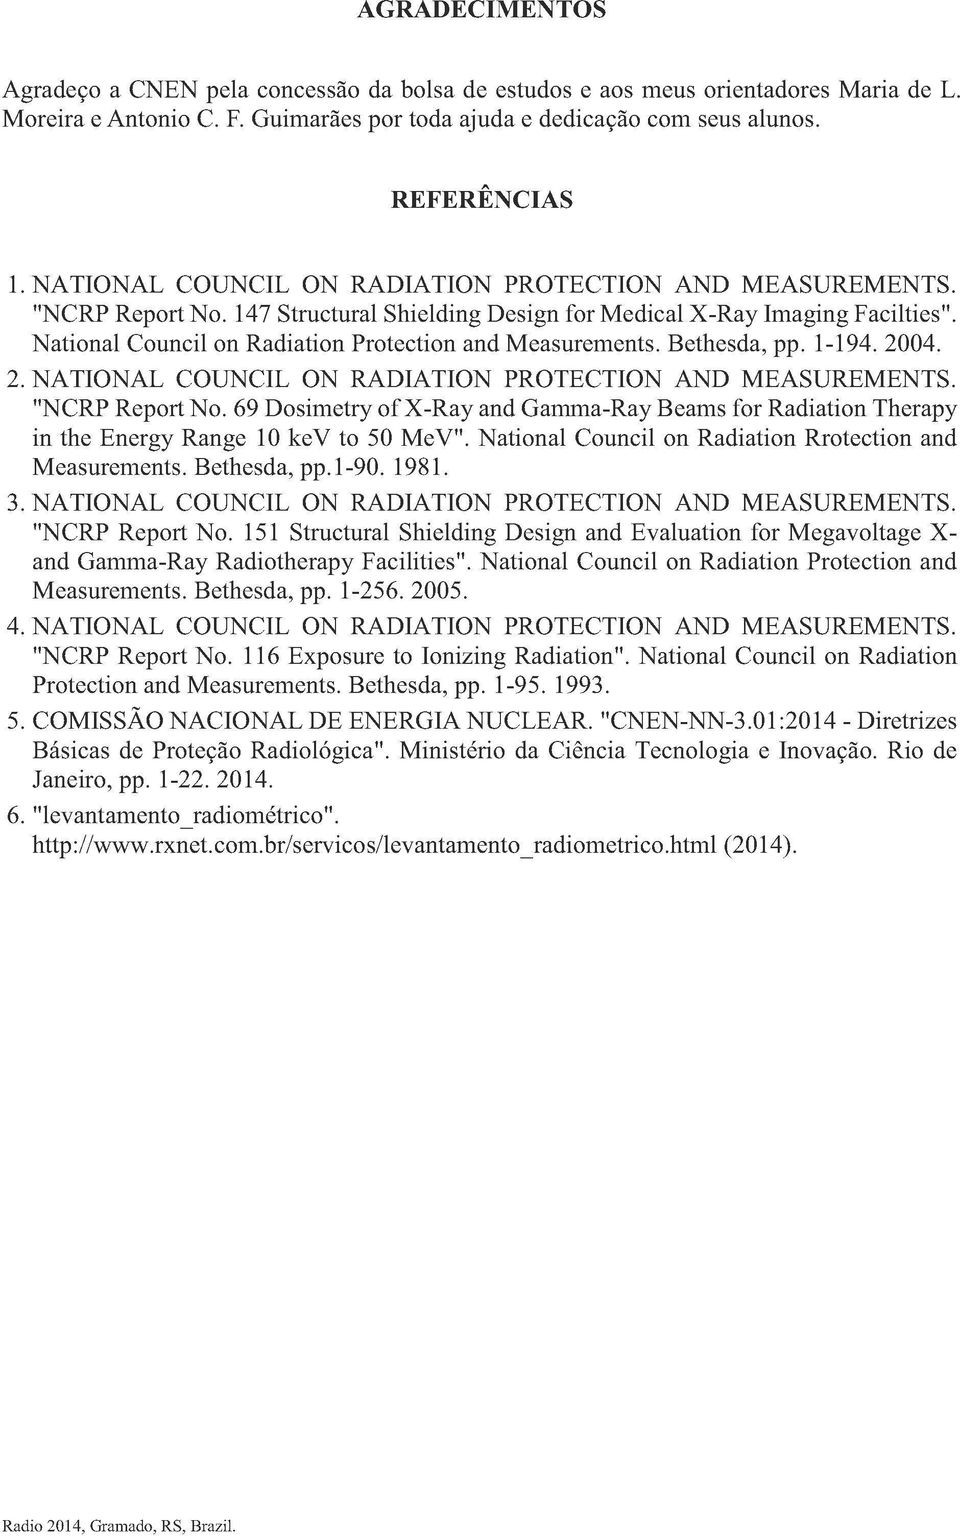 National Council on Radiation Protection and Measurements. Bethesda, pp. 1-194. 2004. 2. NATIONAL COUNCIL ON RADIATION PROTECTION AND MEASUREMENTS. "NCRP Report No.